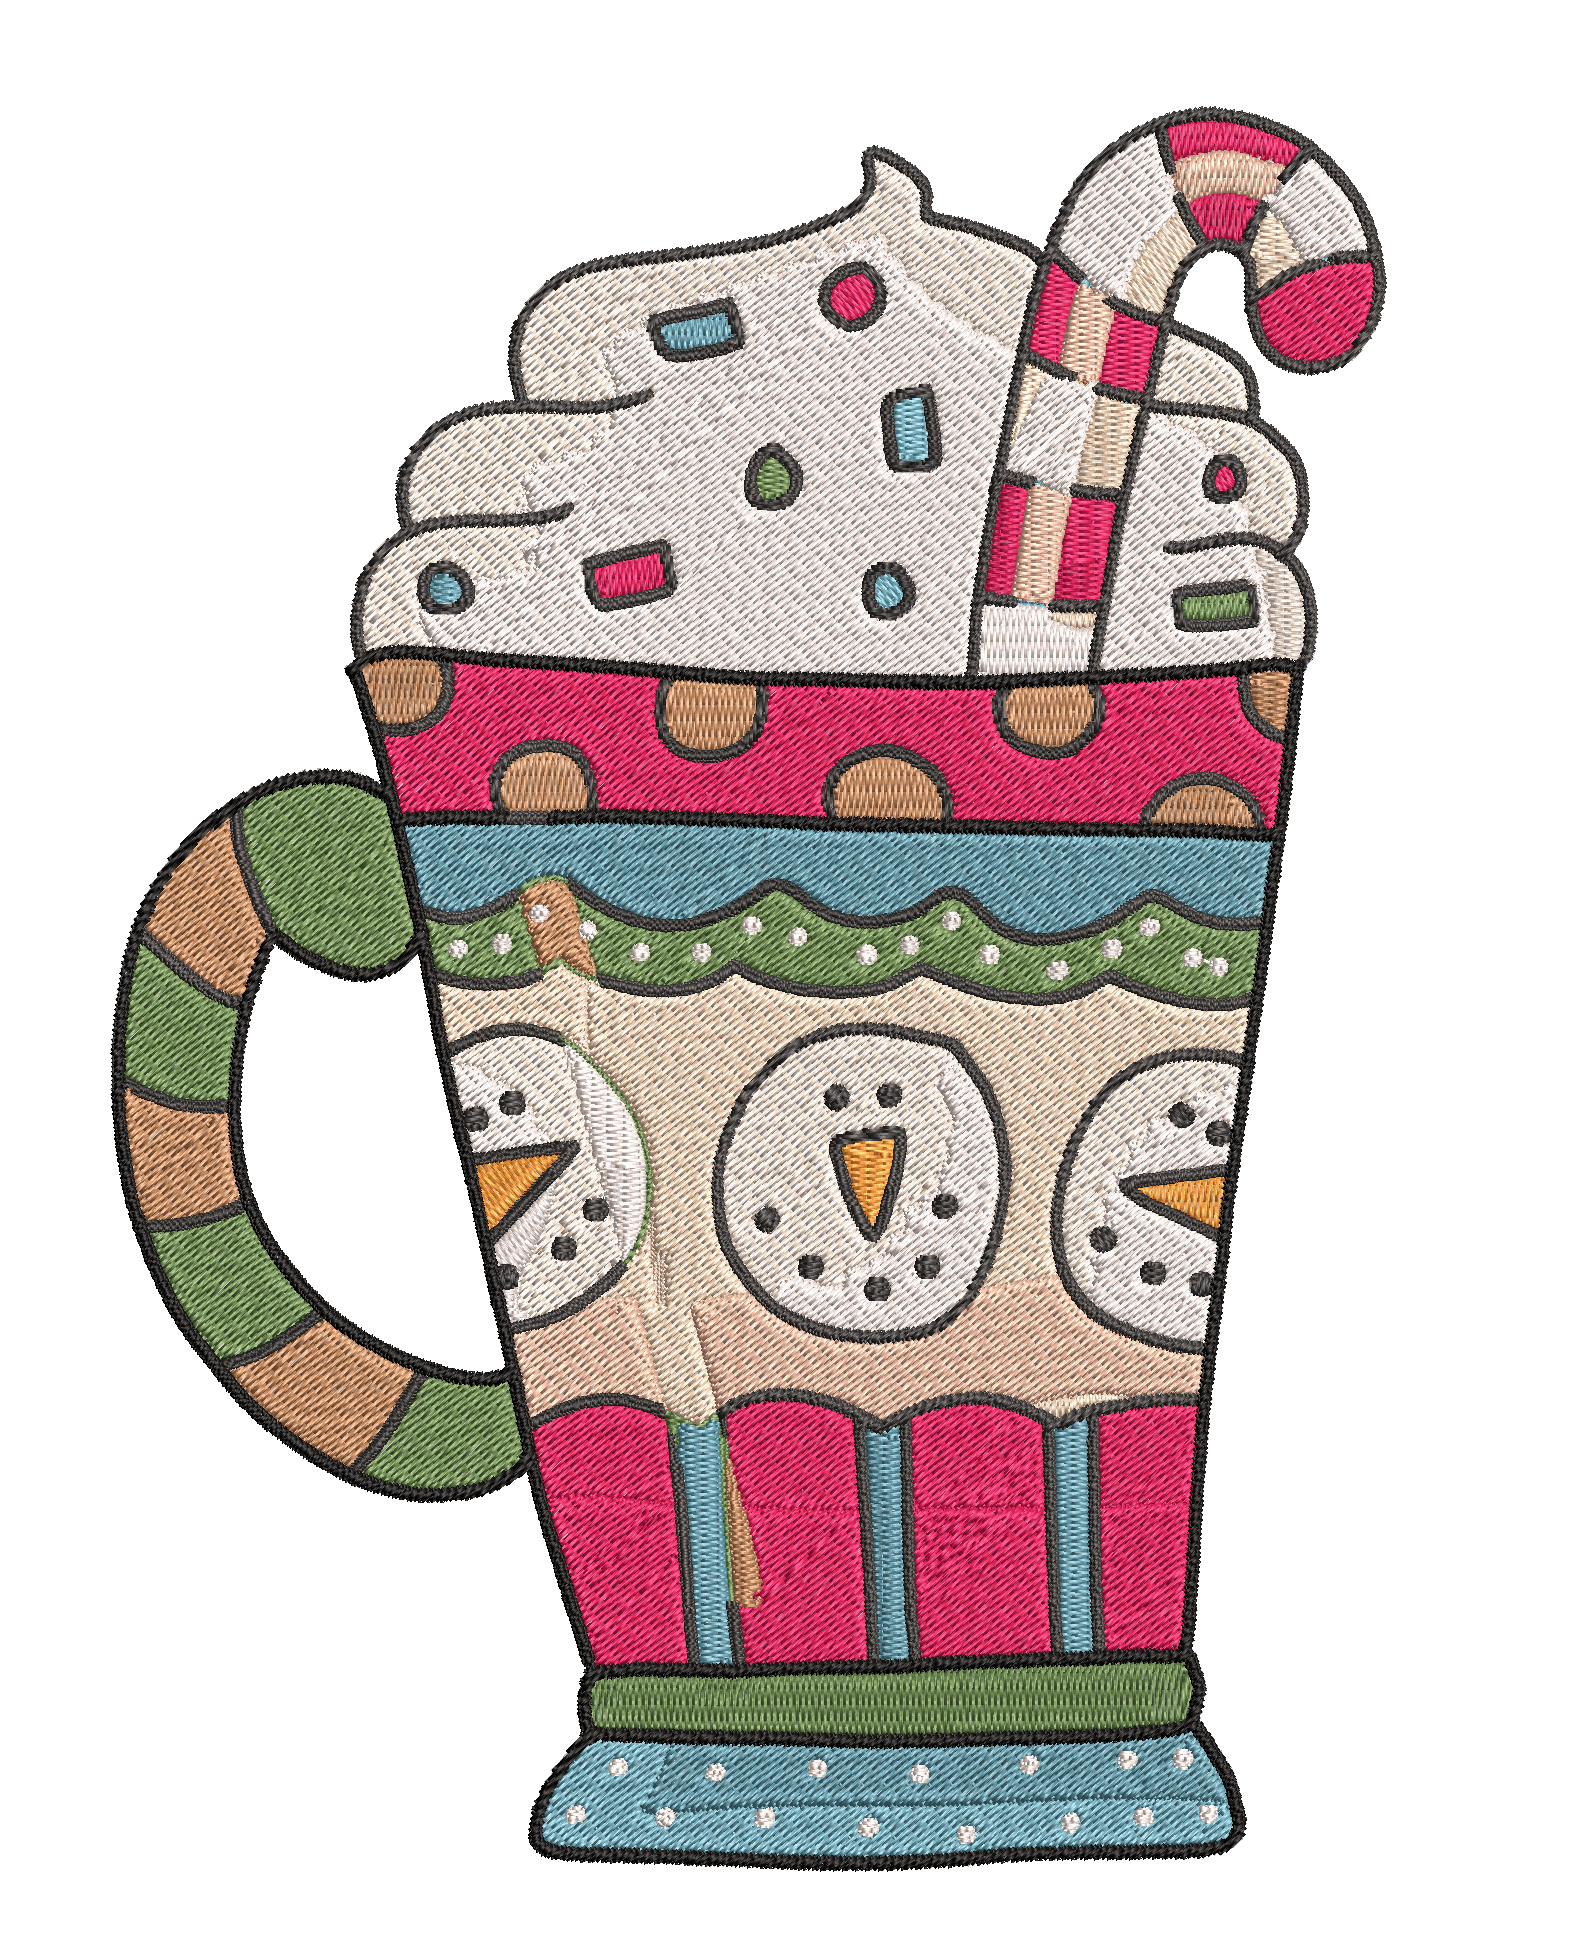 Christmas Mugs - Designs Pack : Embroidery Design - FineryEmbroidery